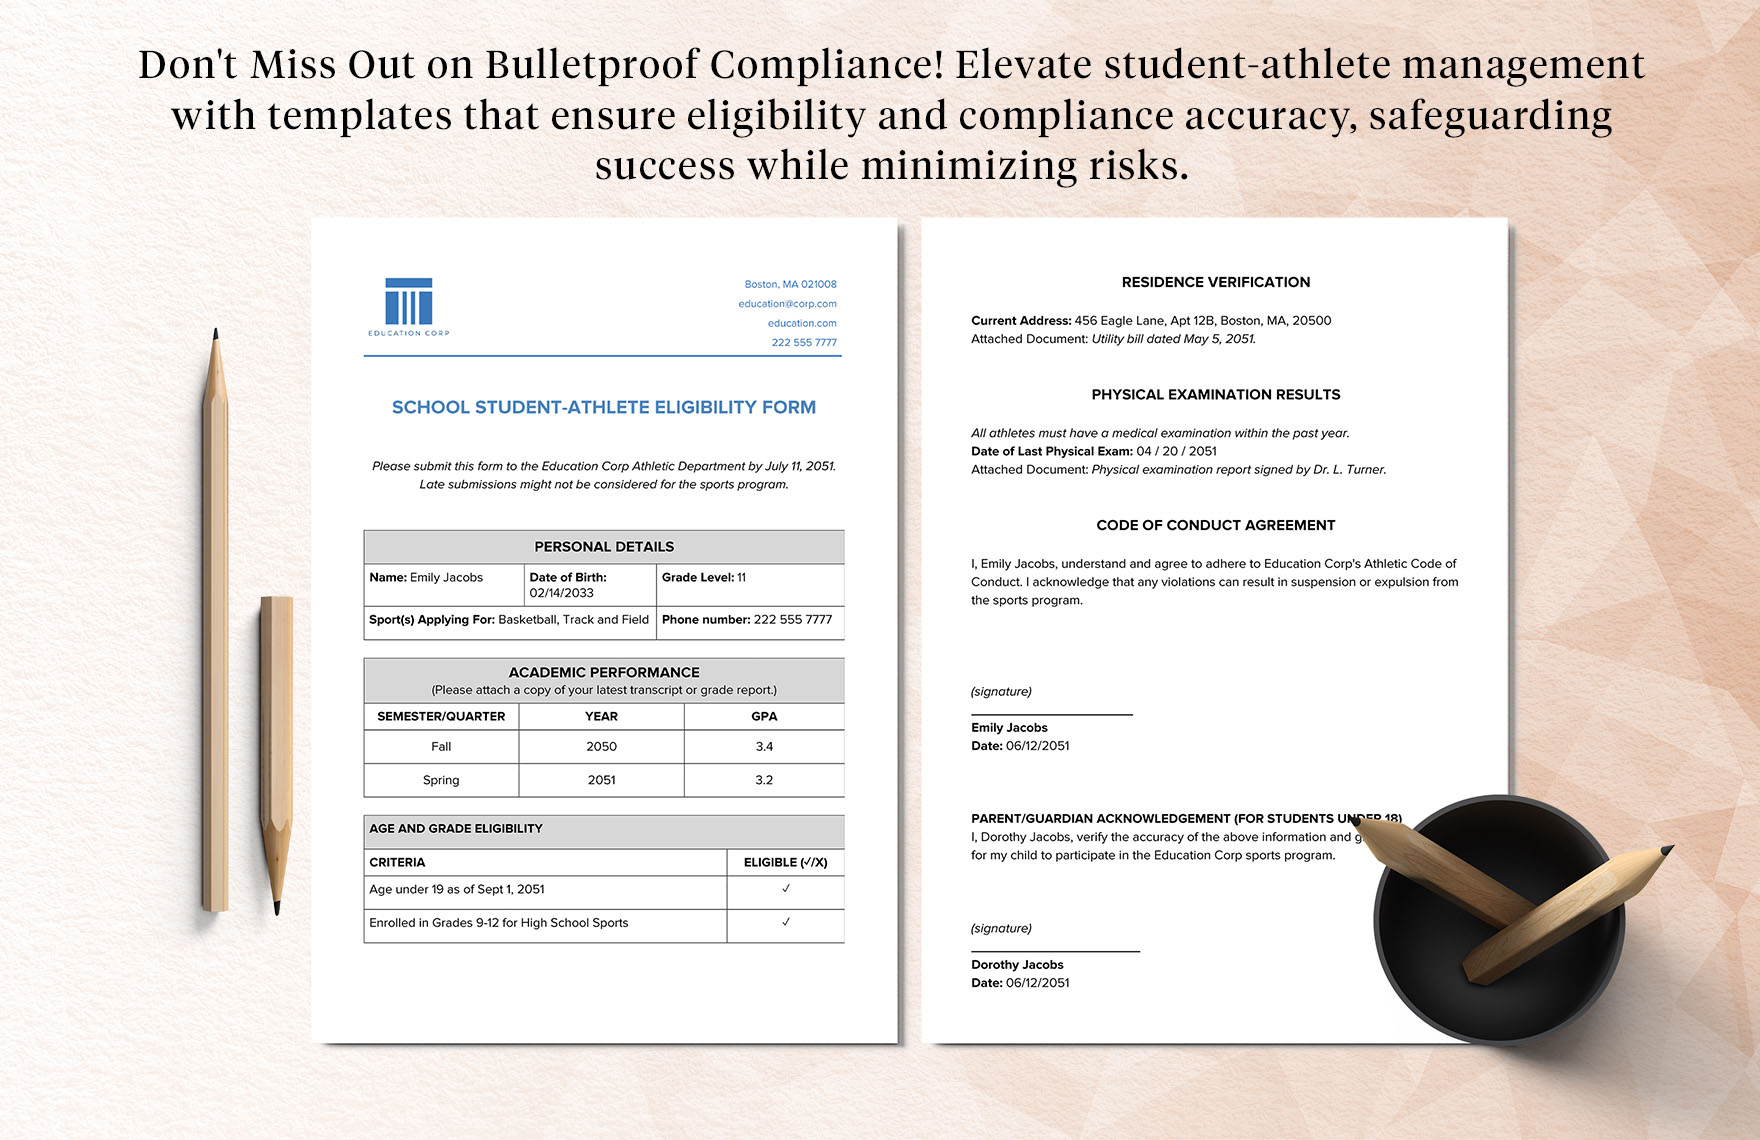 School Student-Athlete Eligibility Form Template